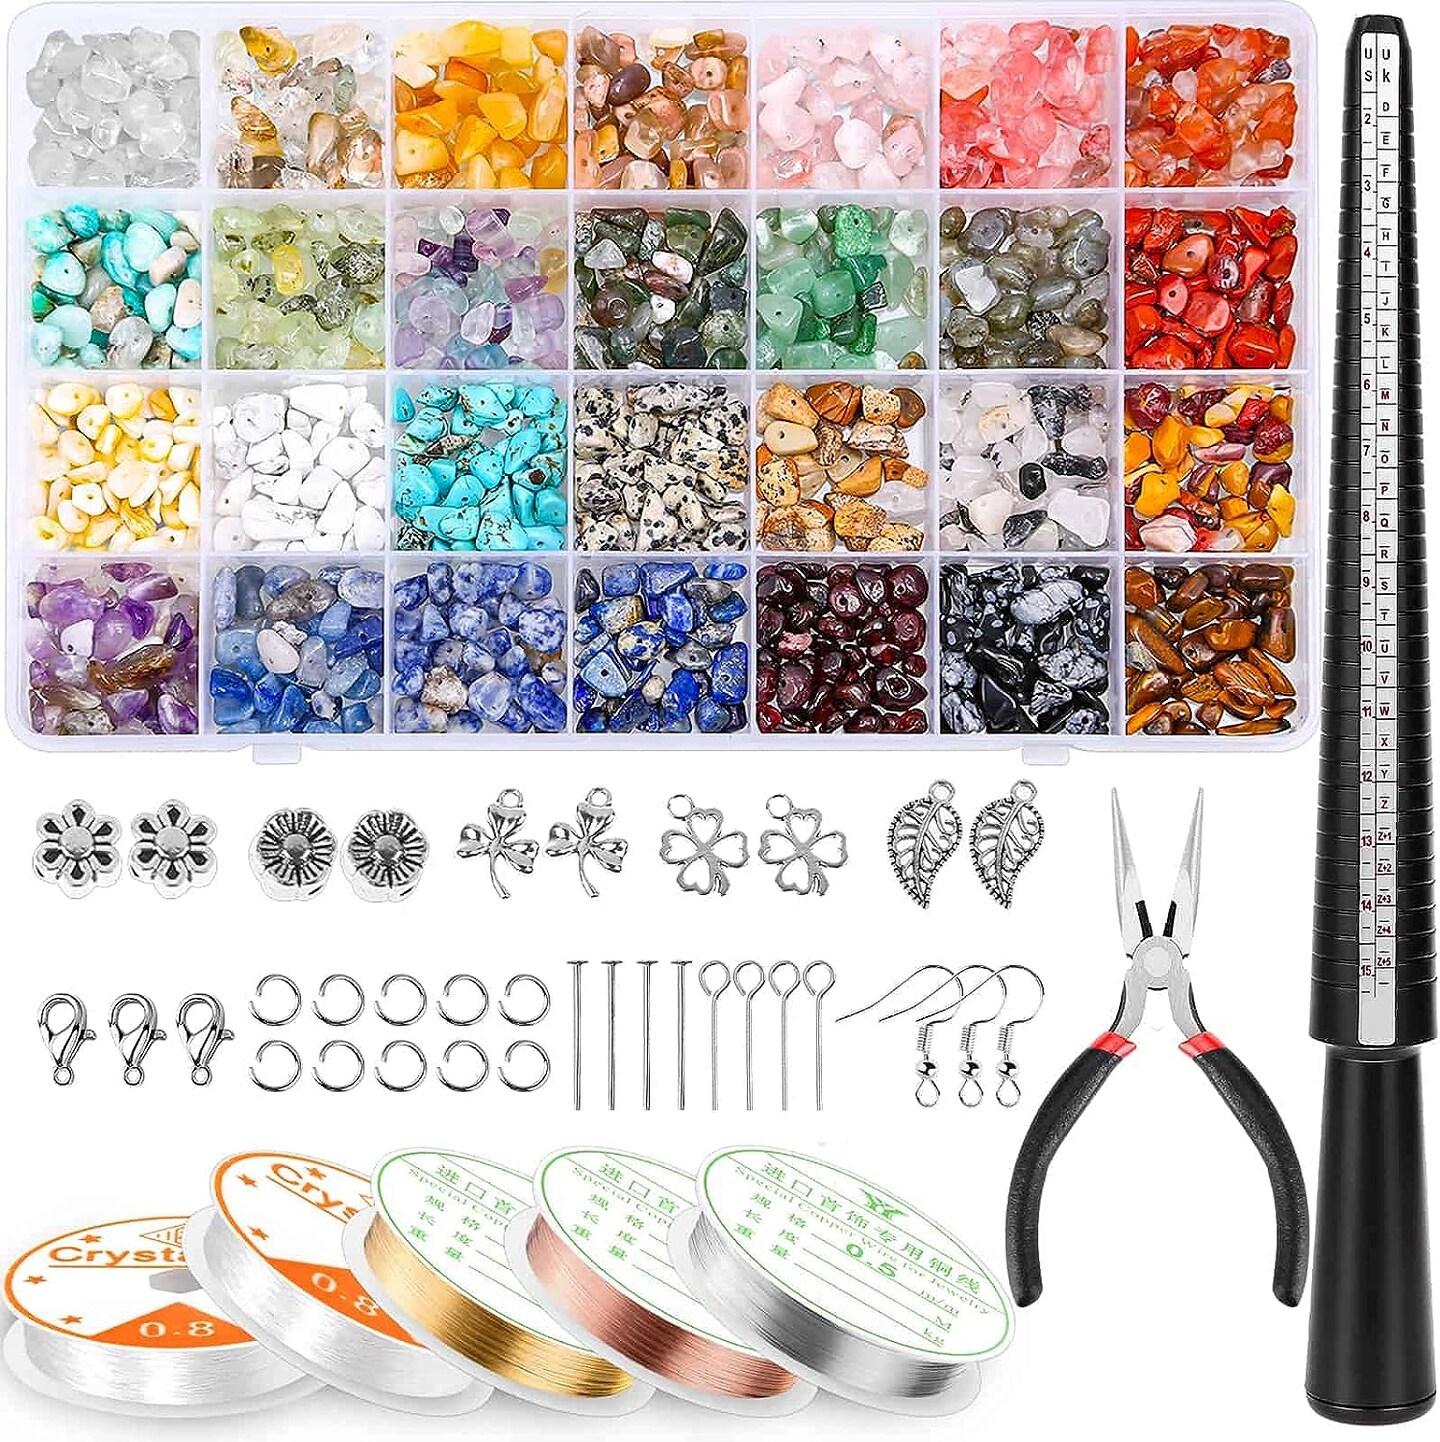 Jewelry Making Kits for Adults Women with 28 Colors Crystal Beads, 1660Pcs Crystal Bead Ring Maker Kit with Jewelry Making Supplies